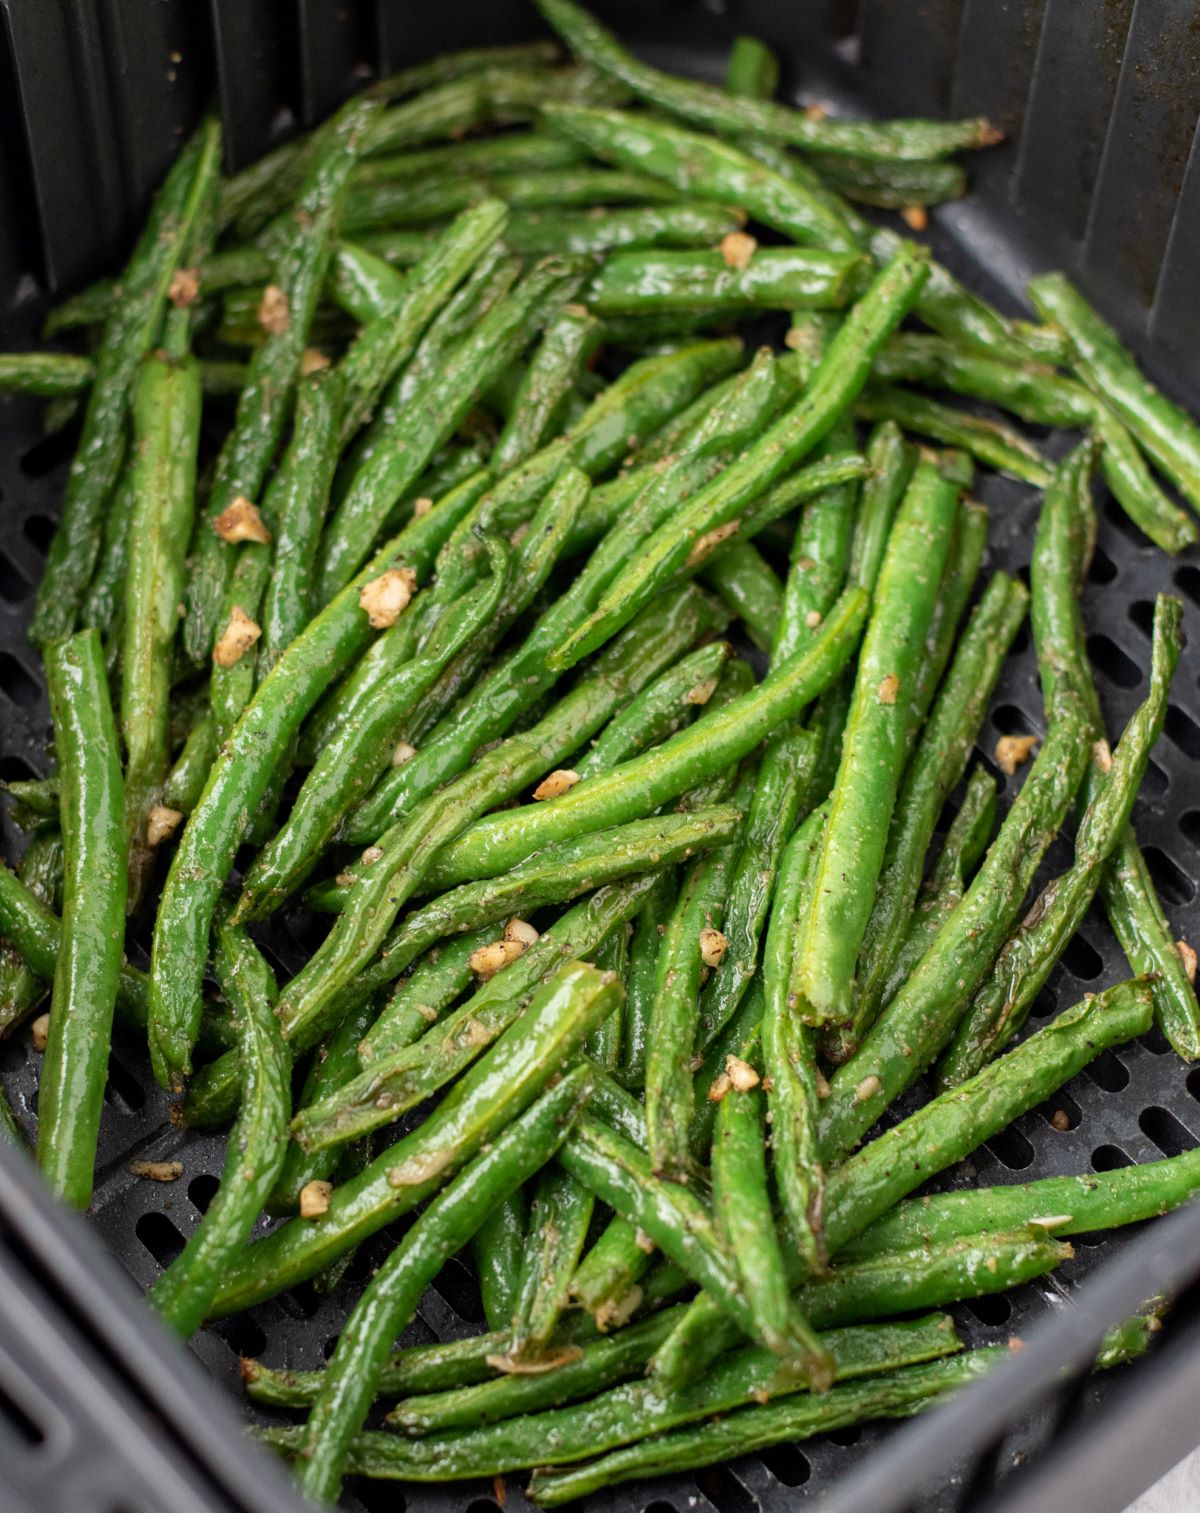 cooked green beans in air fryer basket.